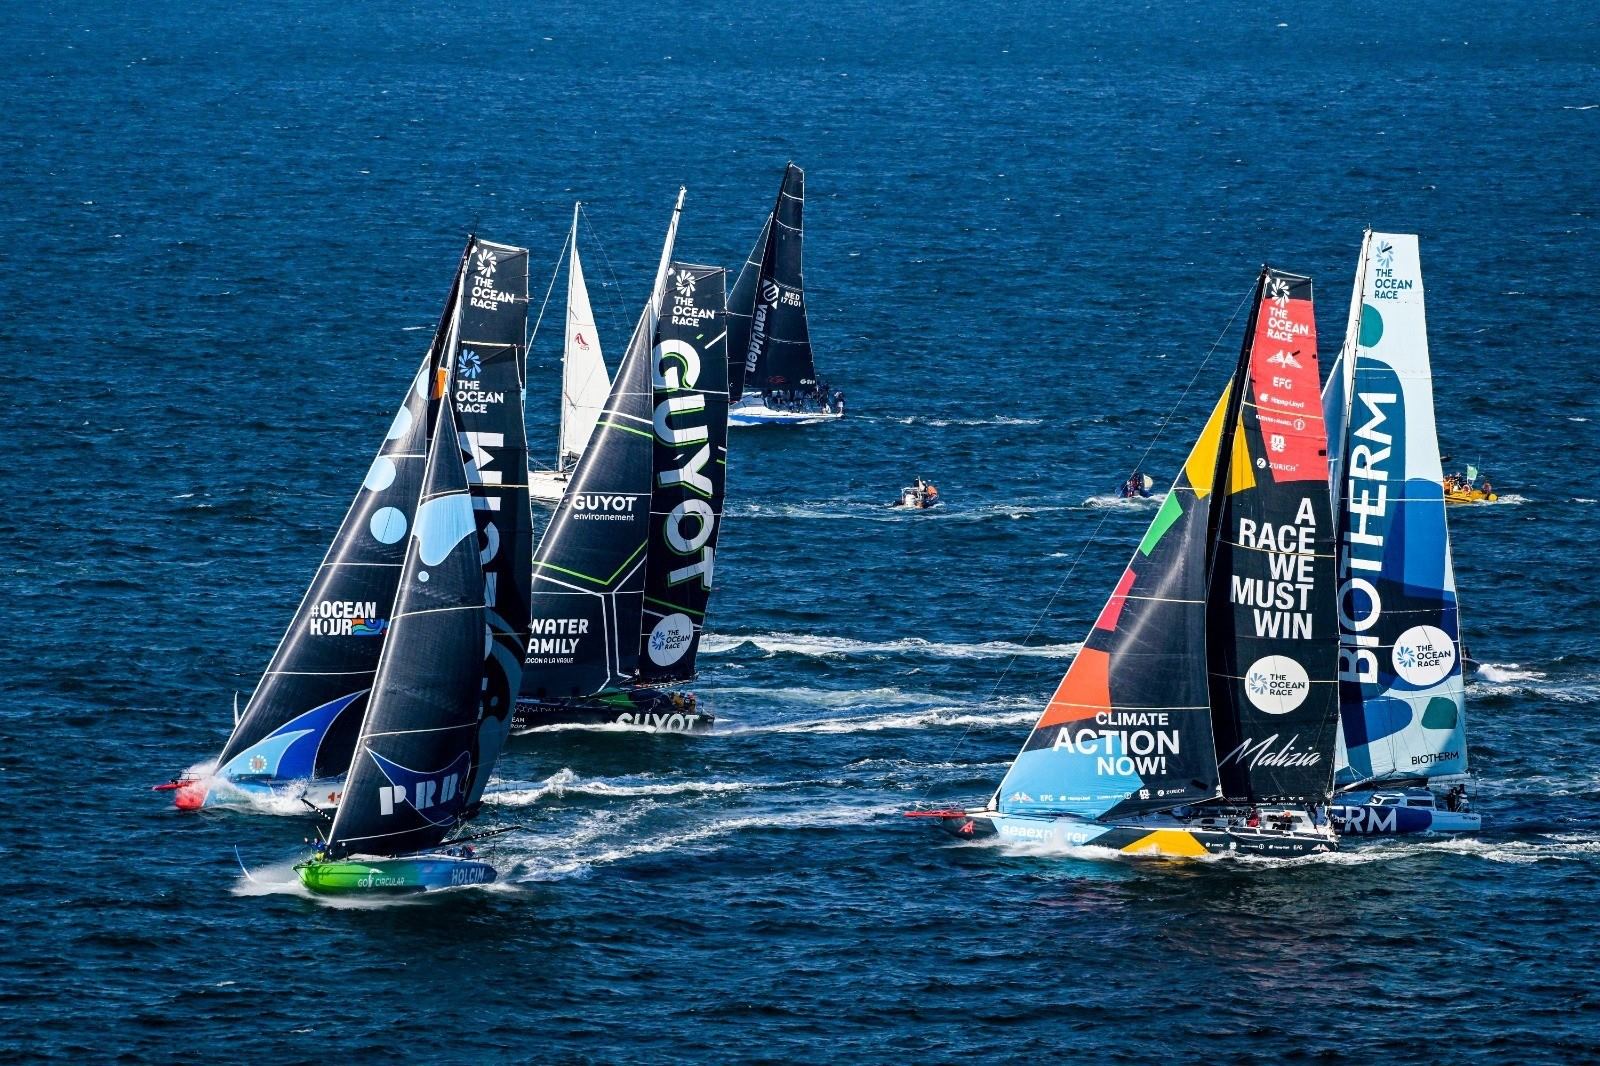 8 Facts About Volvo Ocean Race - Facts.net